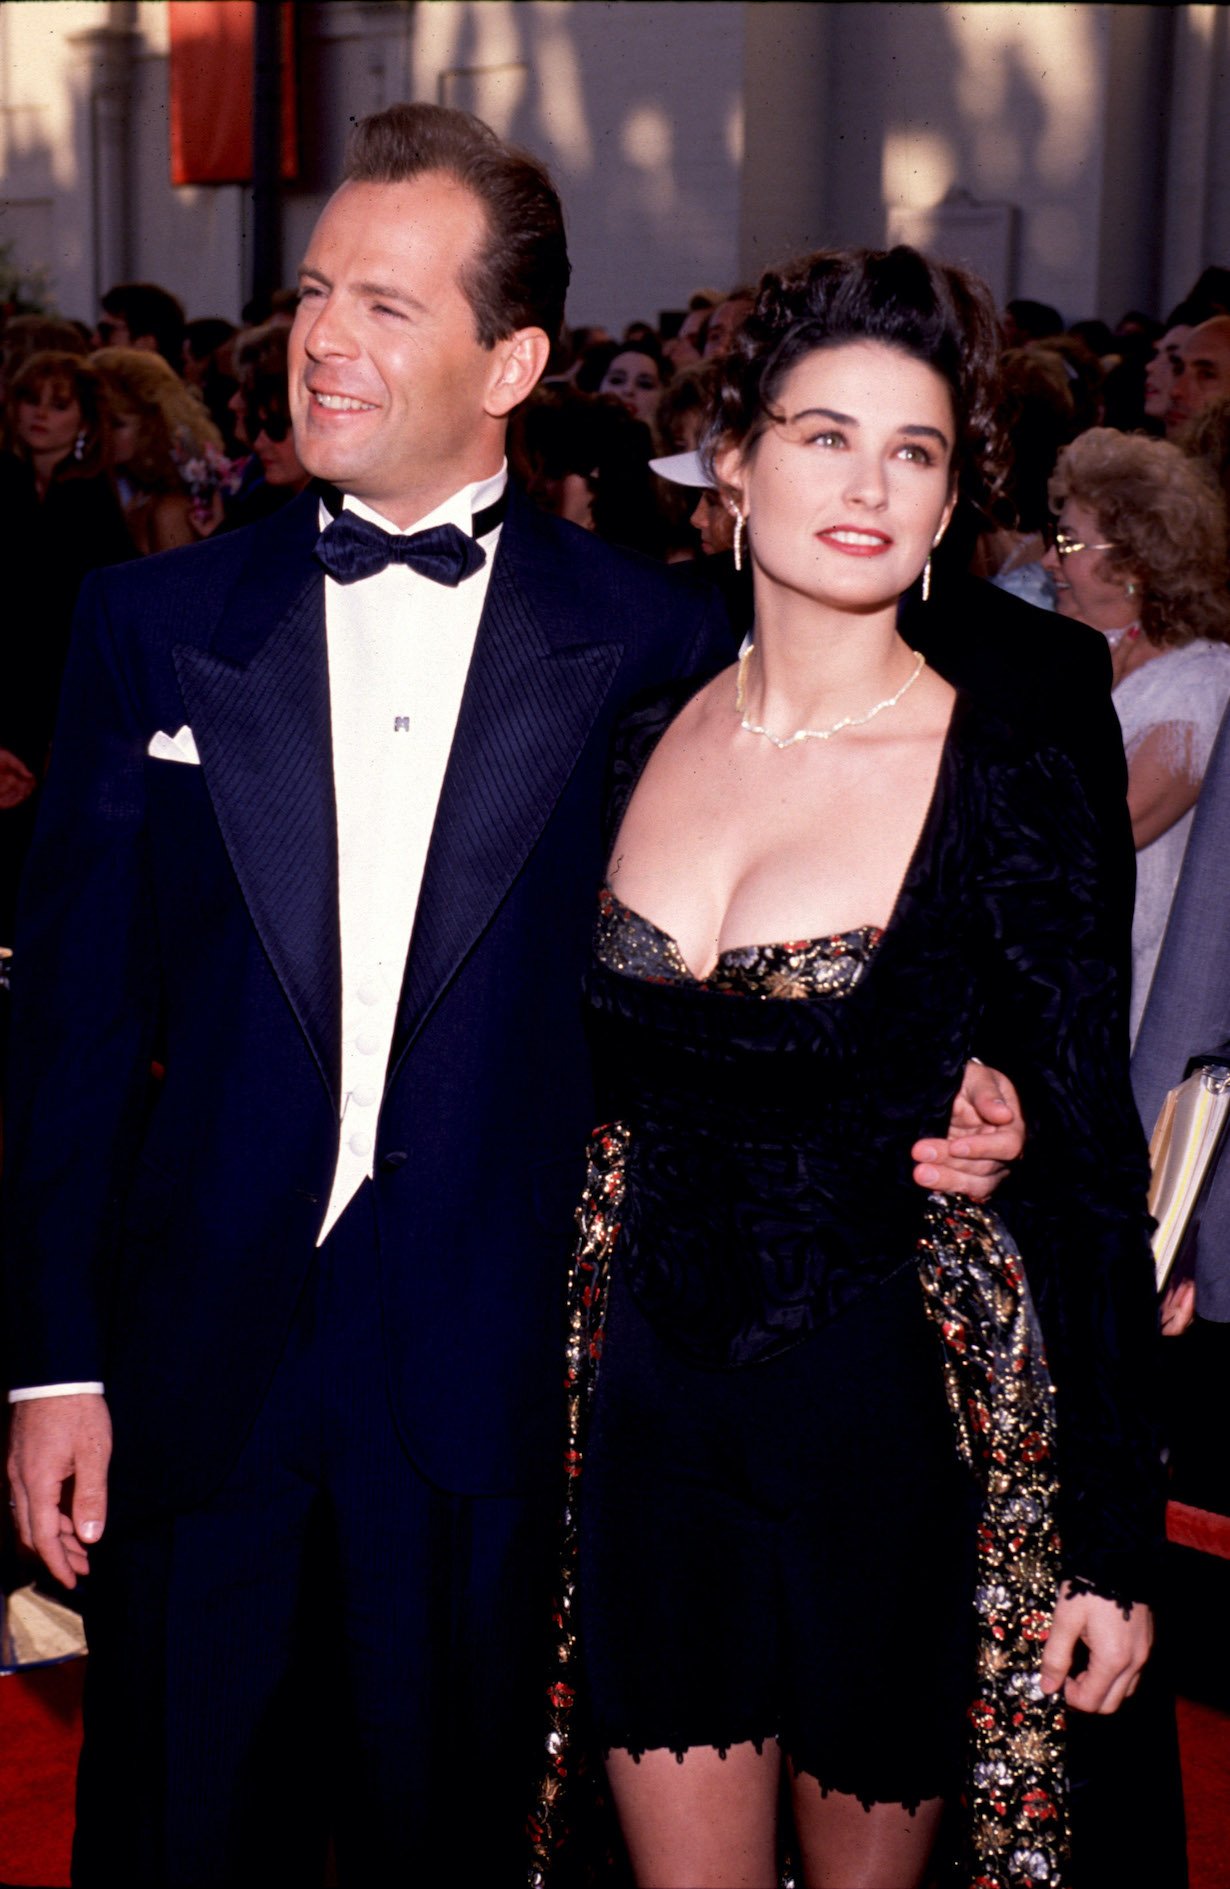 Bruce Willis & Demi Moore photographed at the Emmys